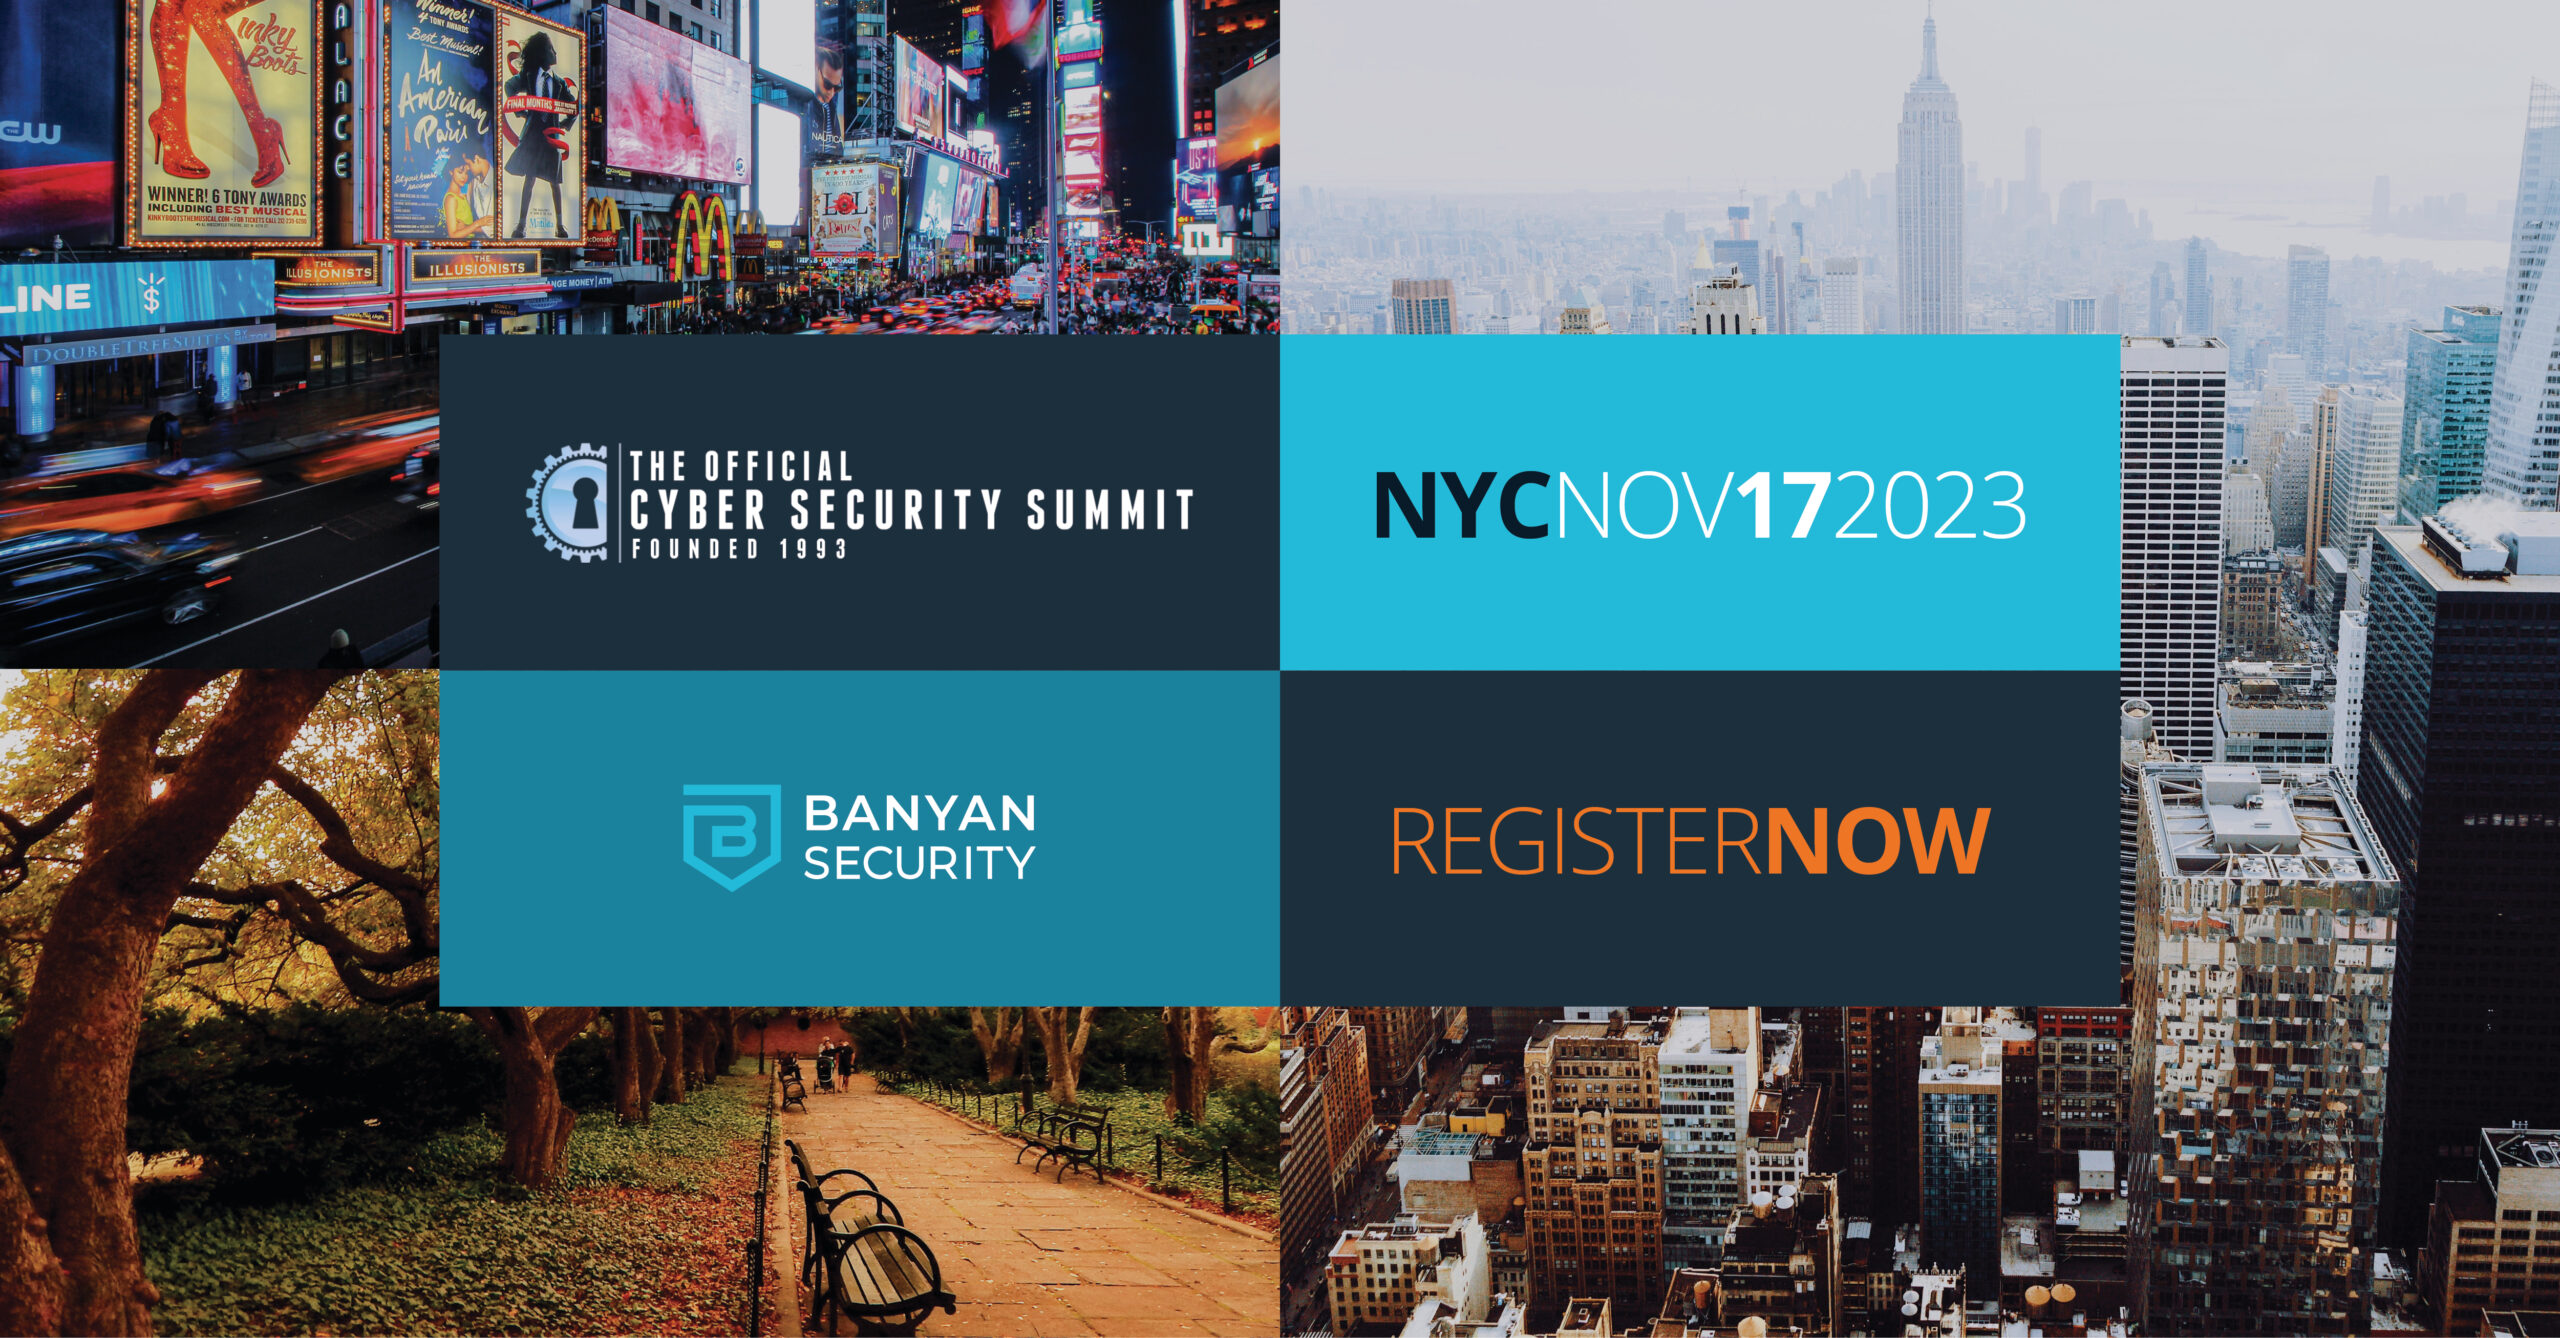 Cyber Security Summit New York NYC